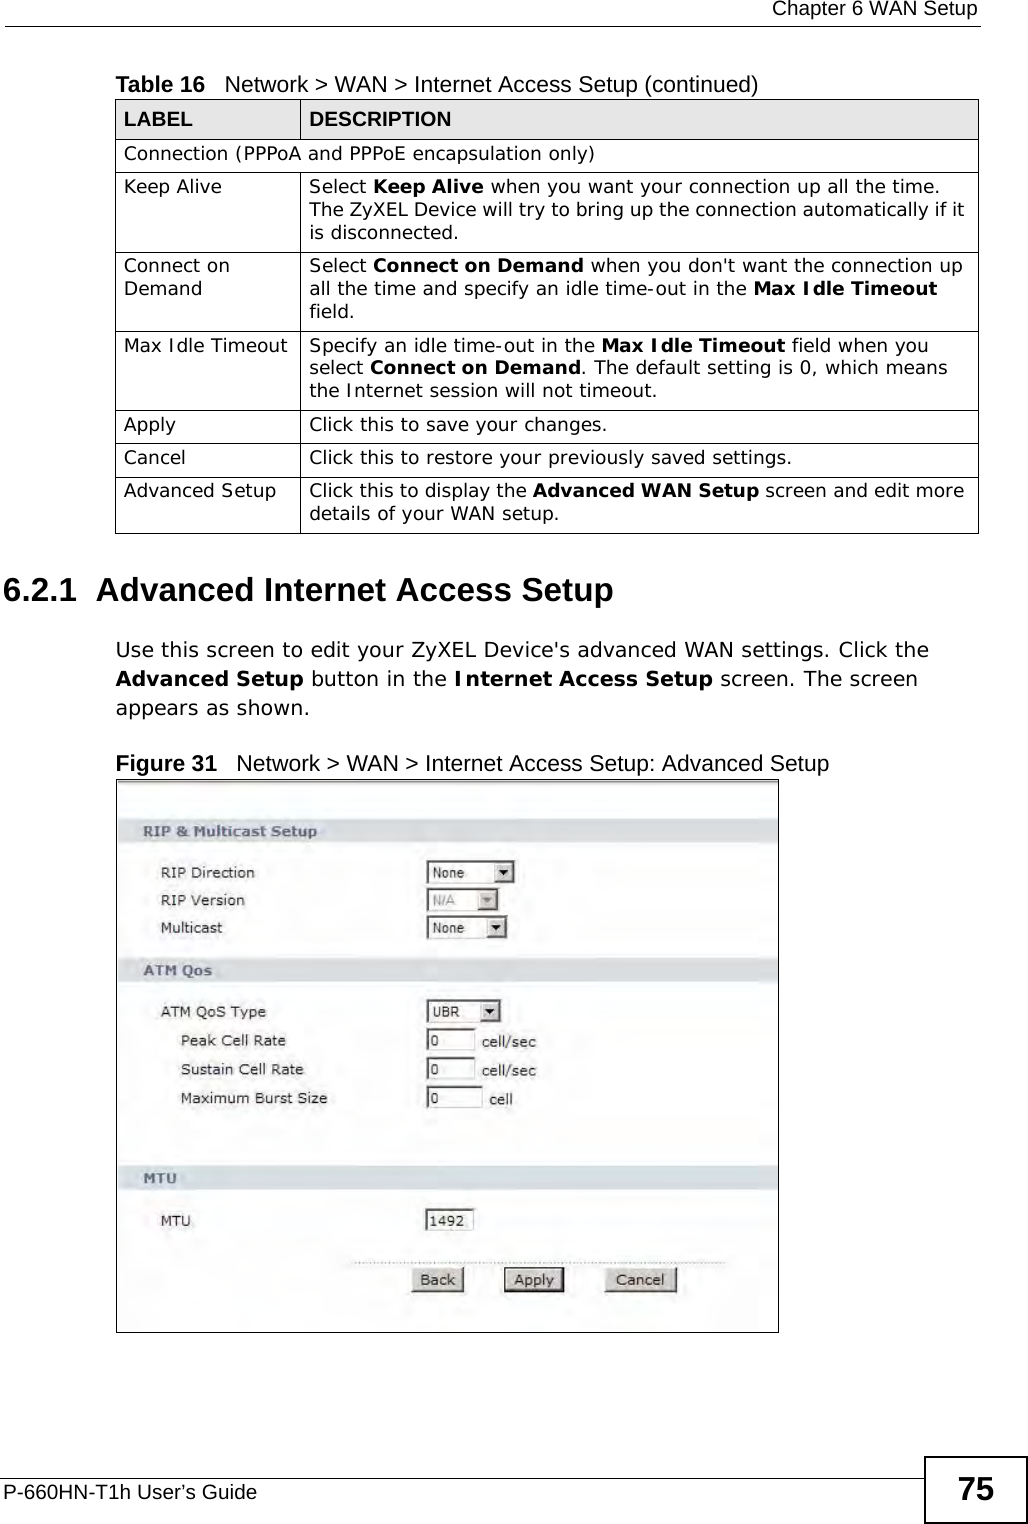  Chapter 6 WAN SetupP-660HN-T1h User’s Guide 756.2.1  Advanced Internet Access Setup Use this screen to edit your ZyXEL Device&apos;s advanced WAN settings. Click the Advanced Setup button in the Internet Access Setup screen. The screen appears as shown.Figure 31   Network &gt; WAN &gt; Internet Access Setup: Advanced SetupConnection (PPPoA and PPPoE encapsulation only)Keep Alive Select Keep Alive when you want your connection up all the time. The ZyXEL Device will try to bring up the connection automatically if it is disconnected.Connect on Demand Select Connect on Demand when you don&apos;t want the connection up all the time and specify an idle time-out in the Max Idle Timeout field.Max Idle Timeout Specify an idle time-out in the Max Idle Timeout field when you select Connect on Demand. The default setting is 0, which means the Internet session will not timeout.Apply Click this to save your changes. Cancel Click this to restore your previously saved settings.Advanced Setup Click this to display the Advanced WAN Setup screen and edit more details of your WAN setup.Table 16   Network &gt; WAN &gt; Internet Access Setup (continued)LABEL DESCRIPTION